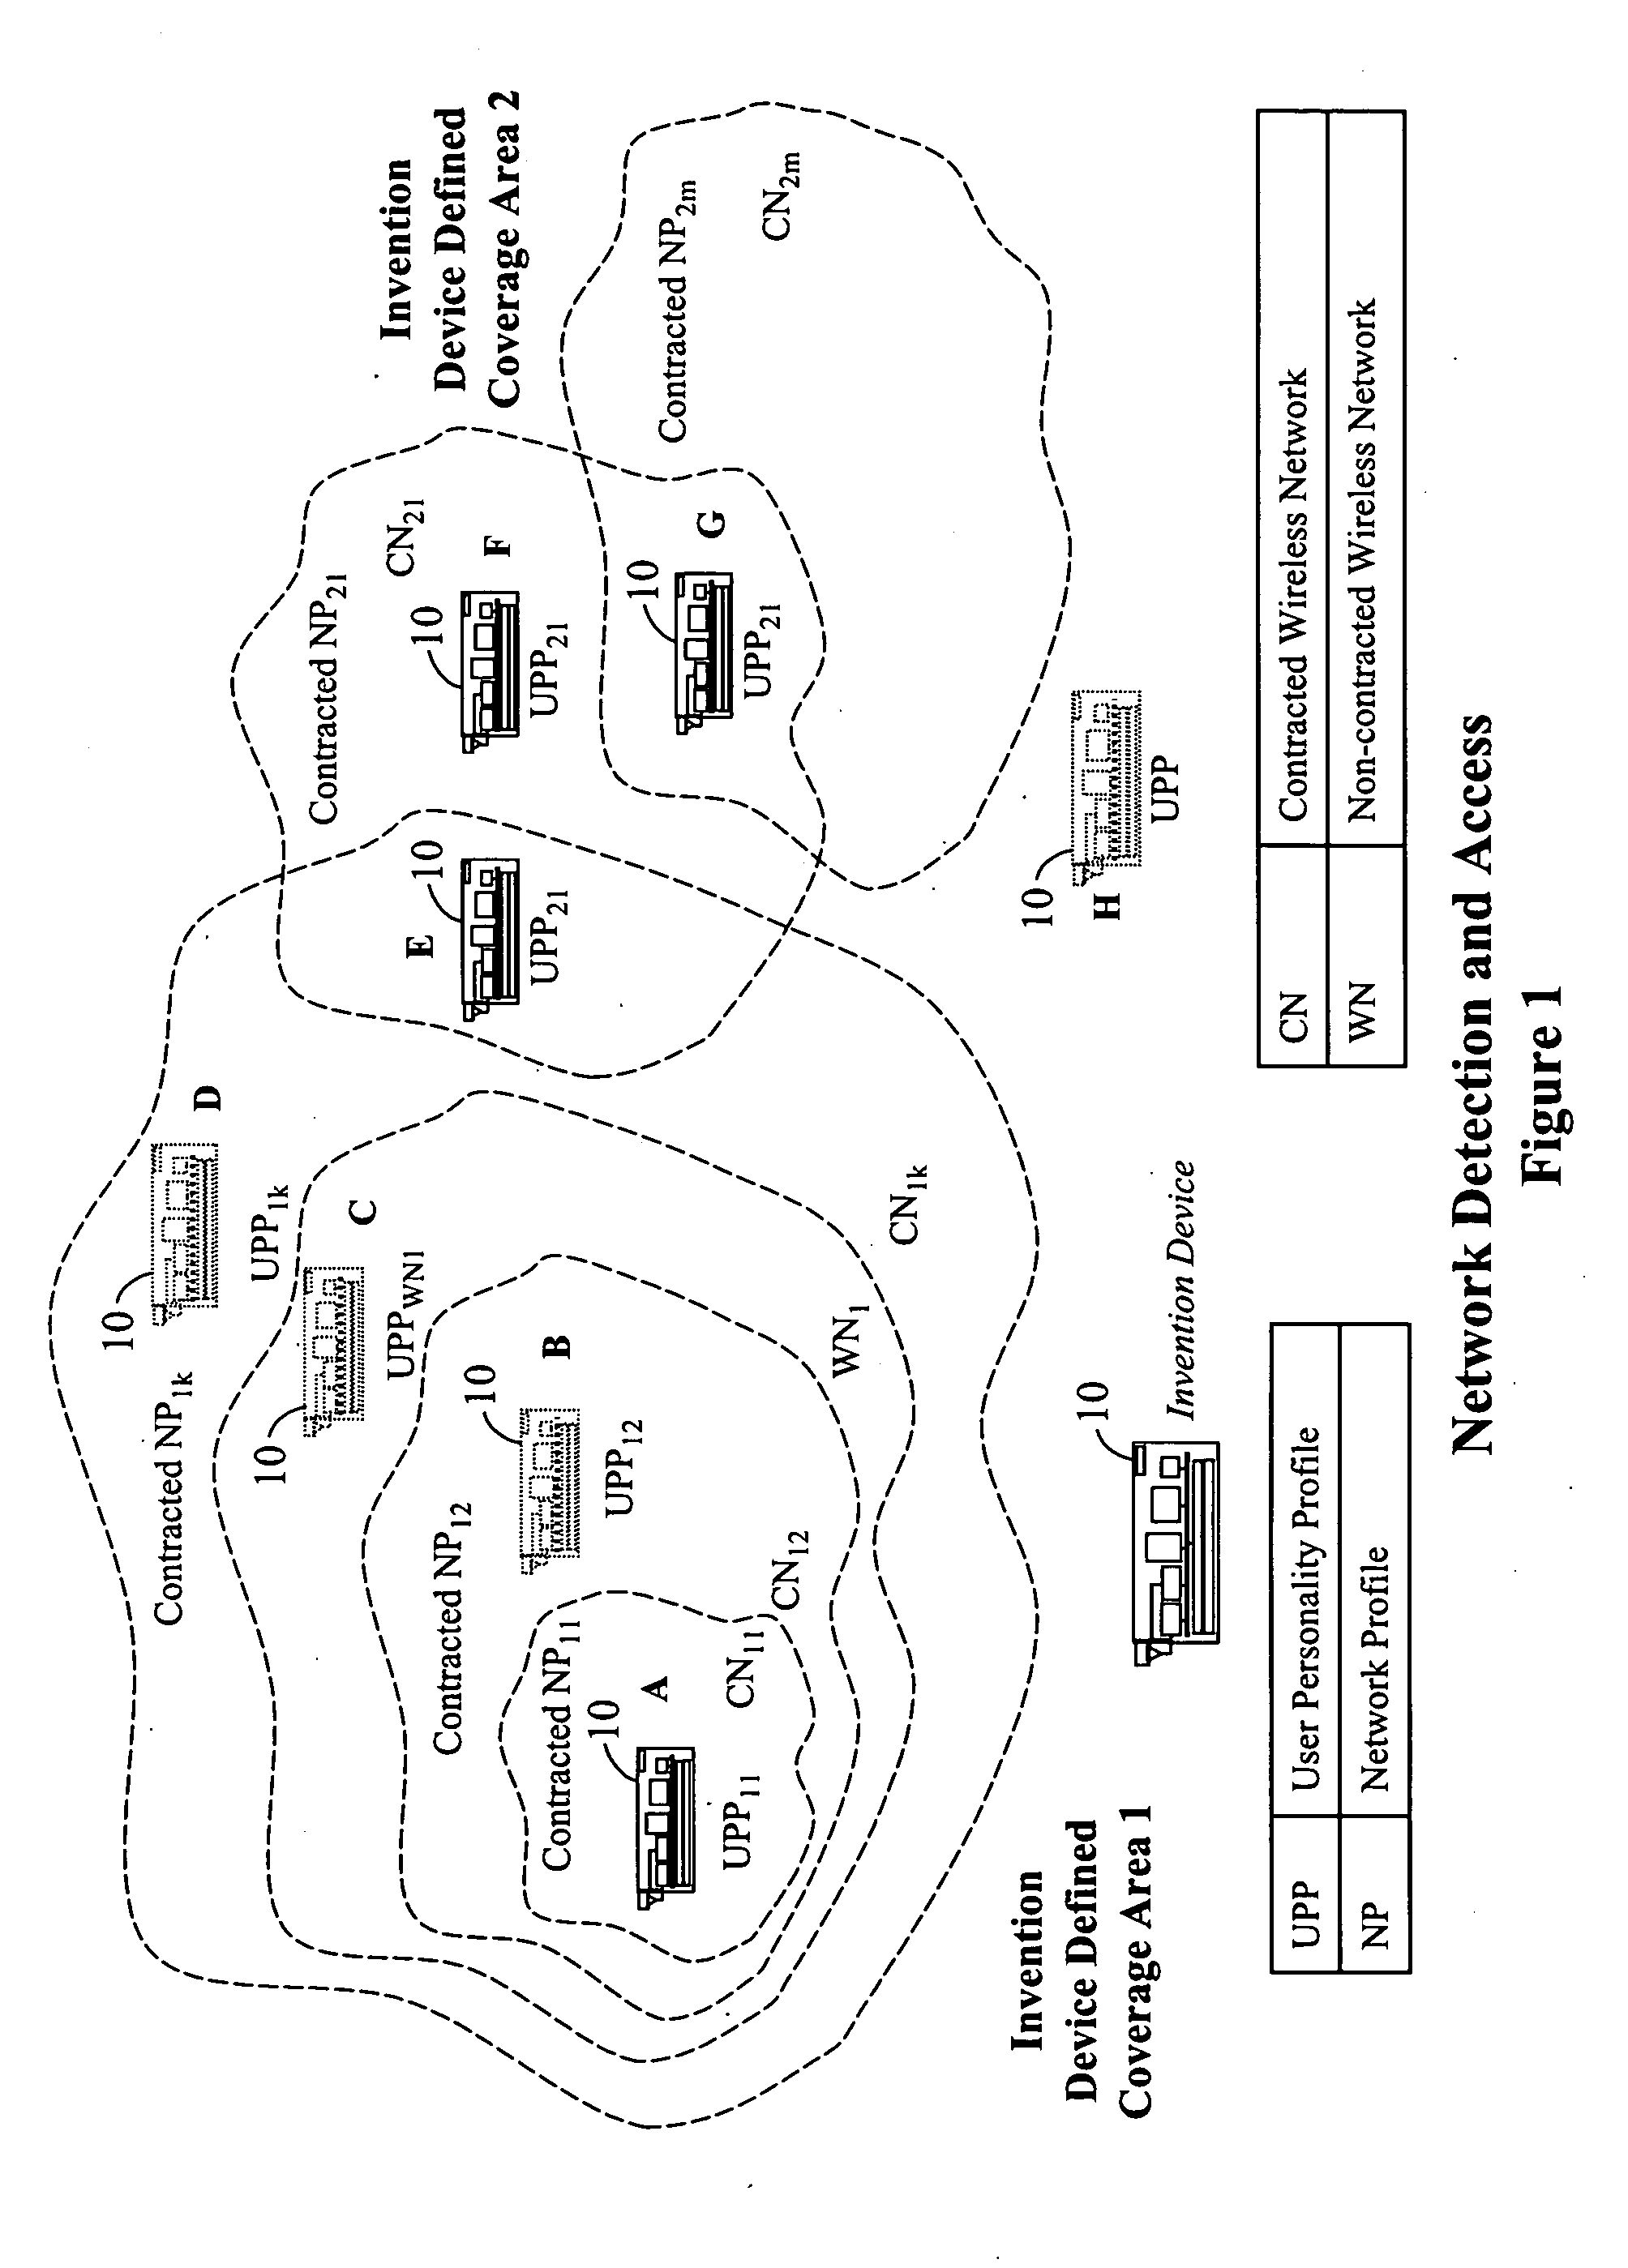 Advanced multi-network client device for wideband multimedia access to private and public wireless networks